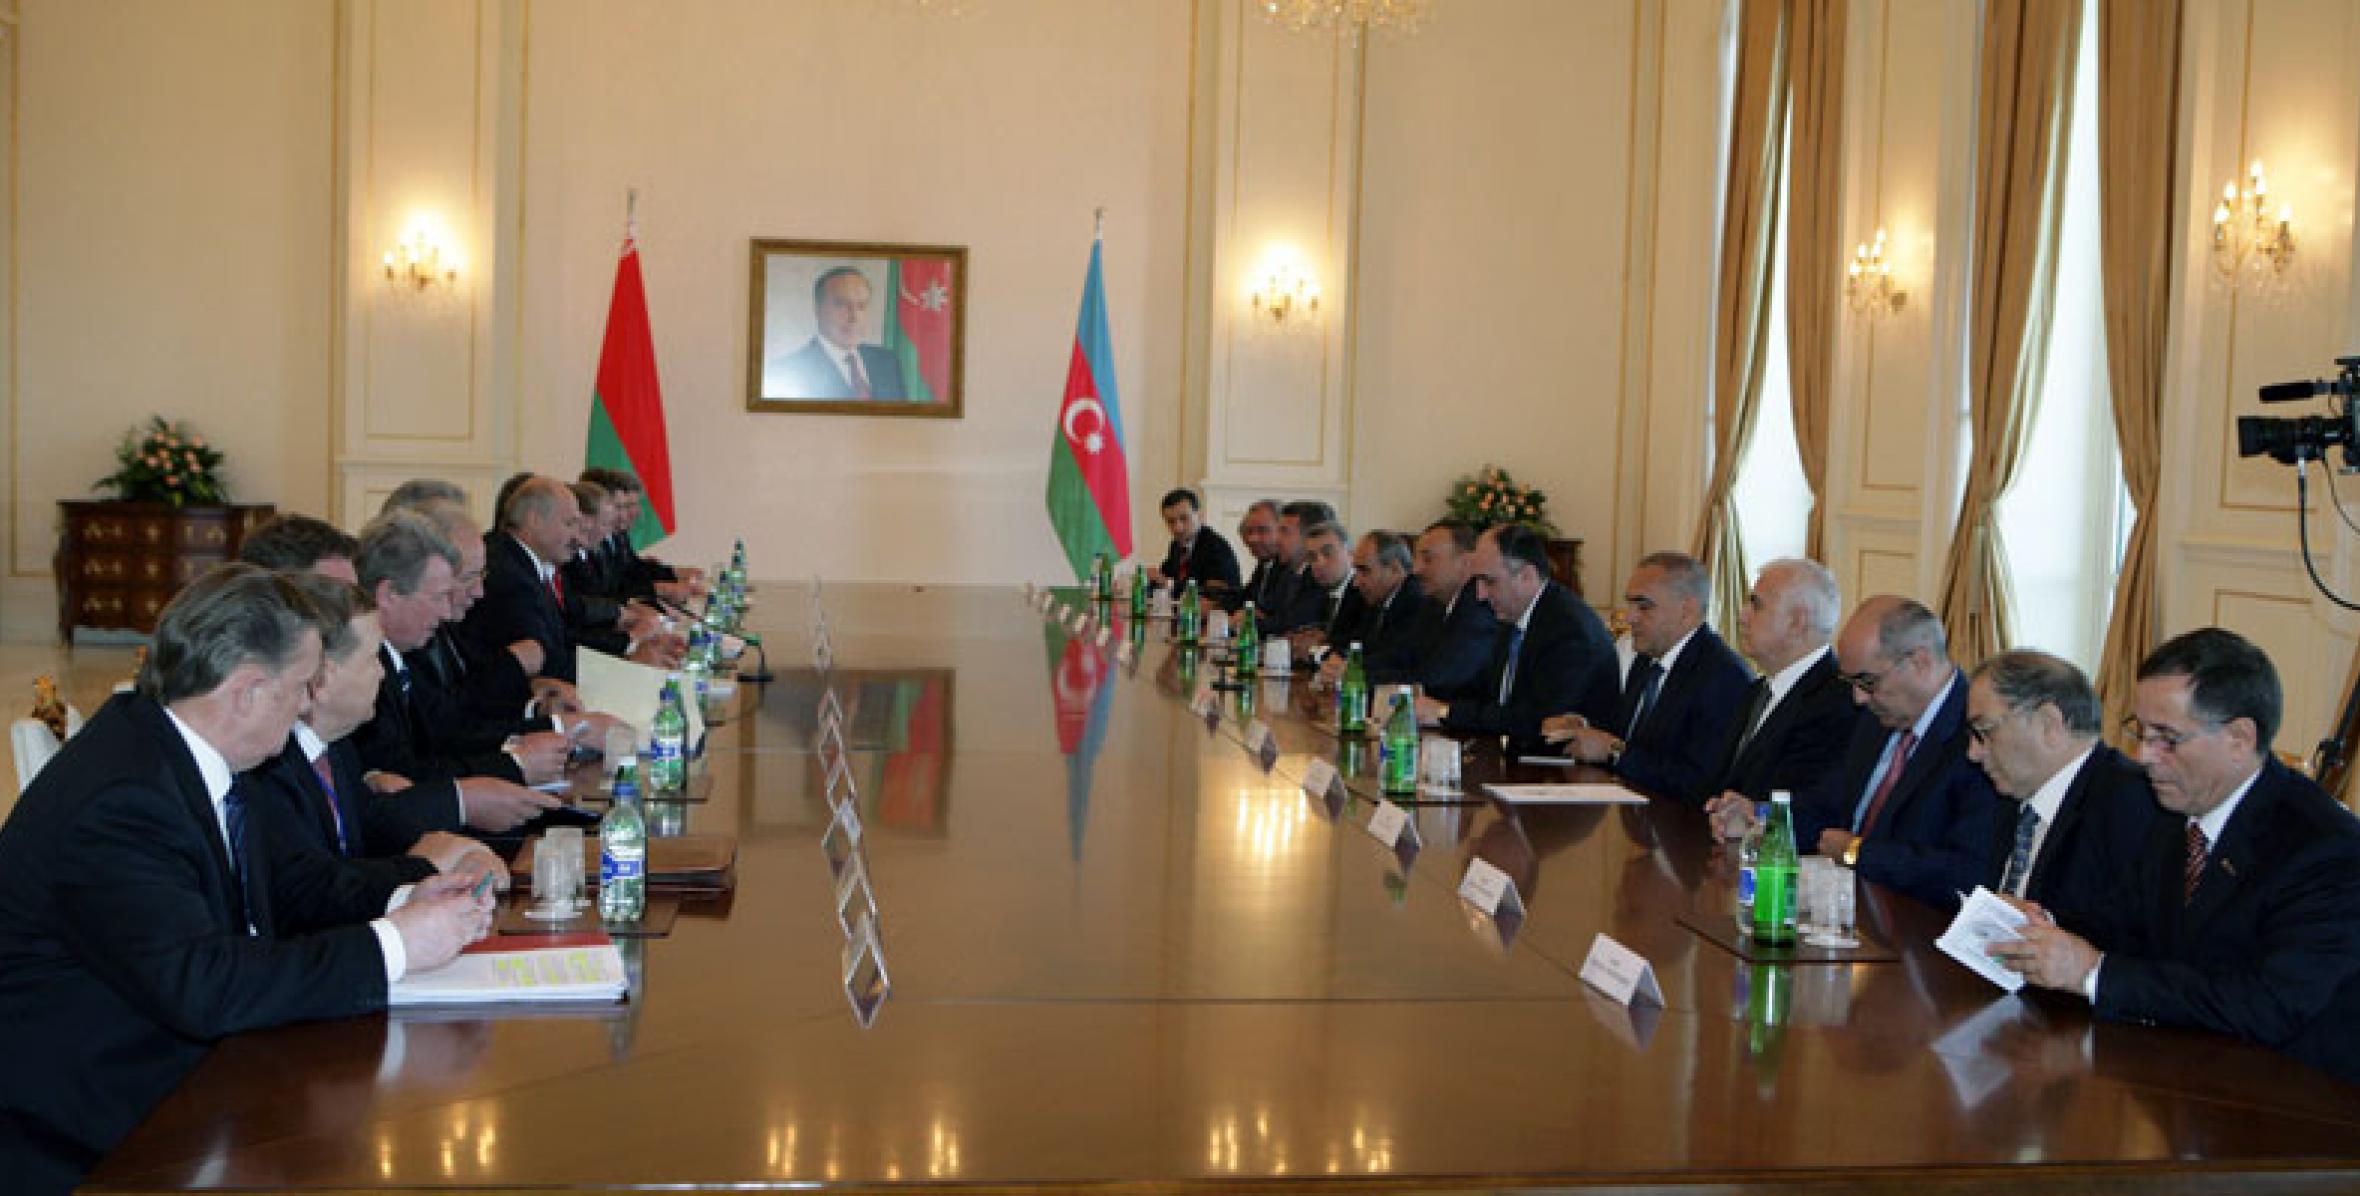 President Ilham Aliyev and President of Belarus Alexander Lukashenko held an expanded meeting with participation of the delegations from both sides